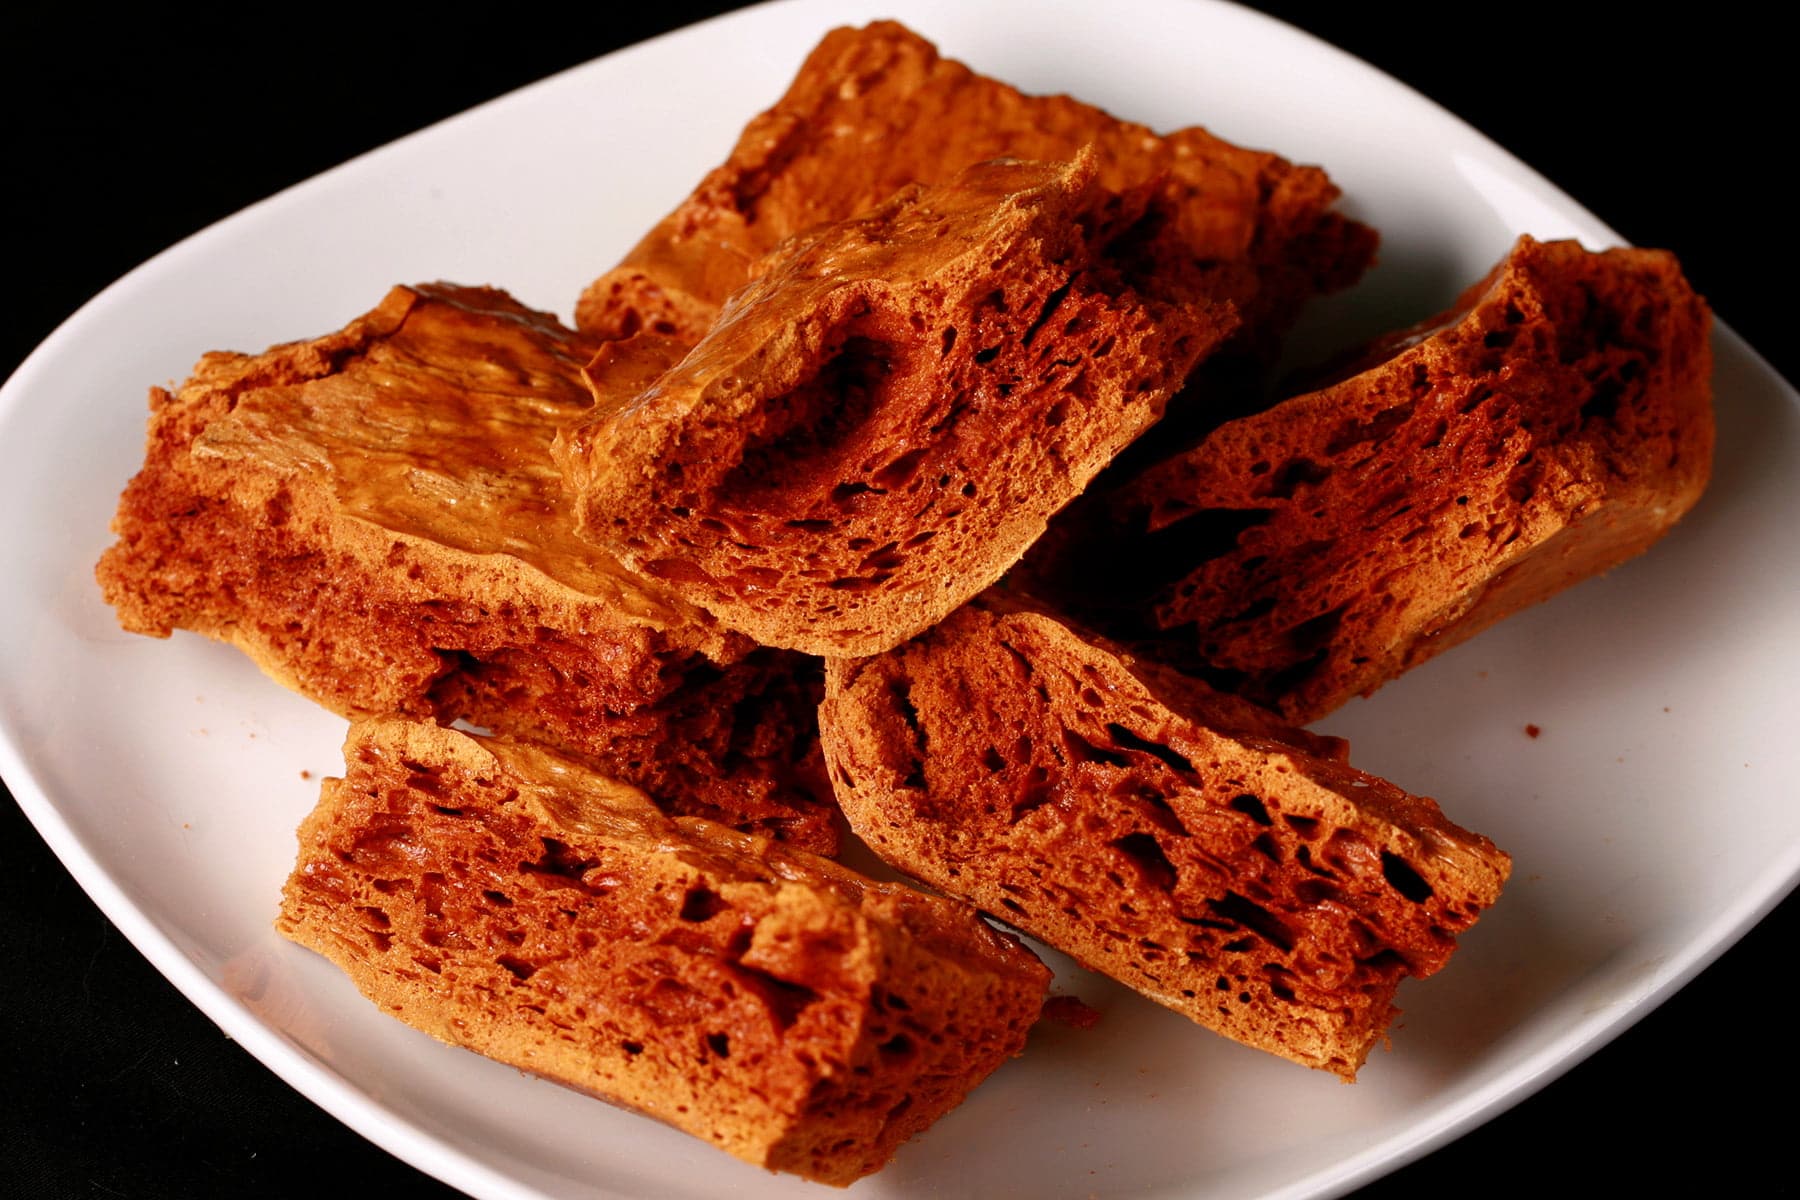 Chunks of deep amber coloured sponge toffee are piled on a small white plate.